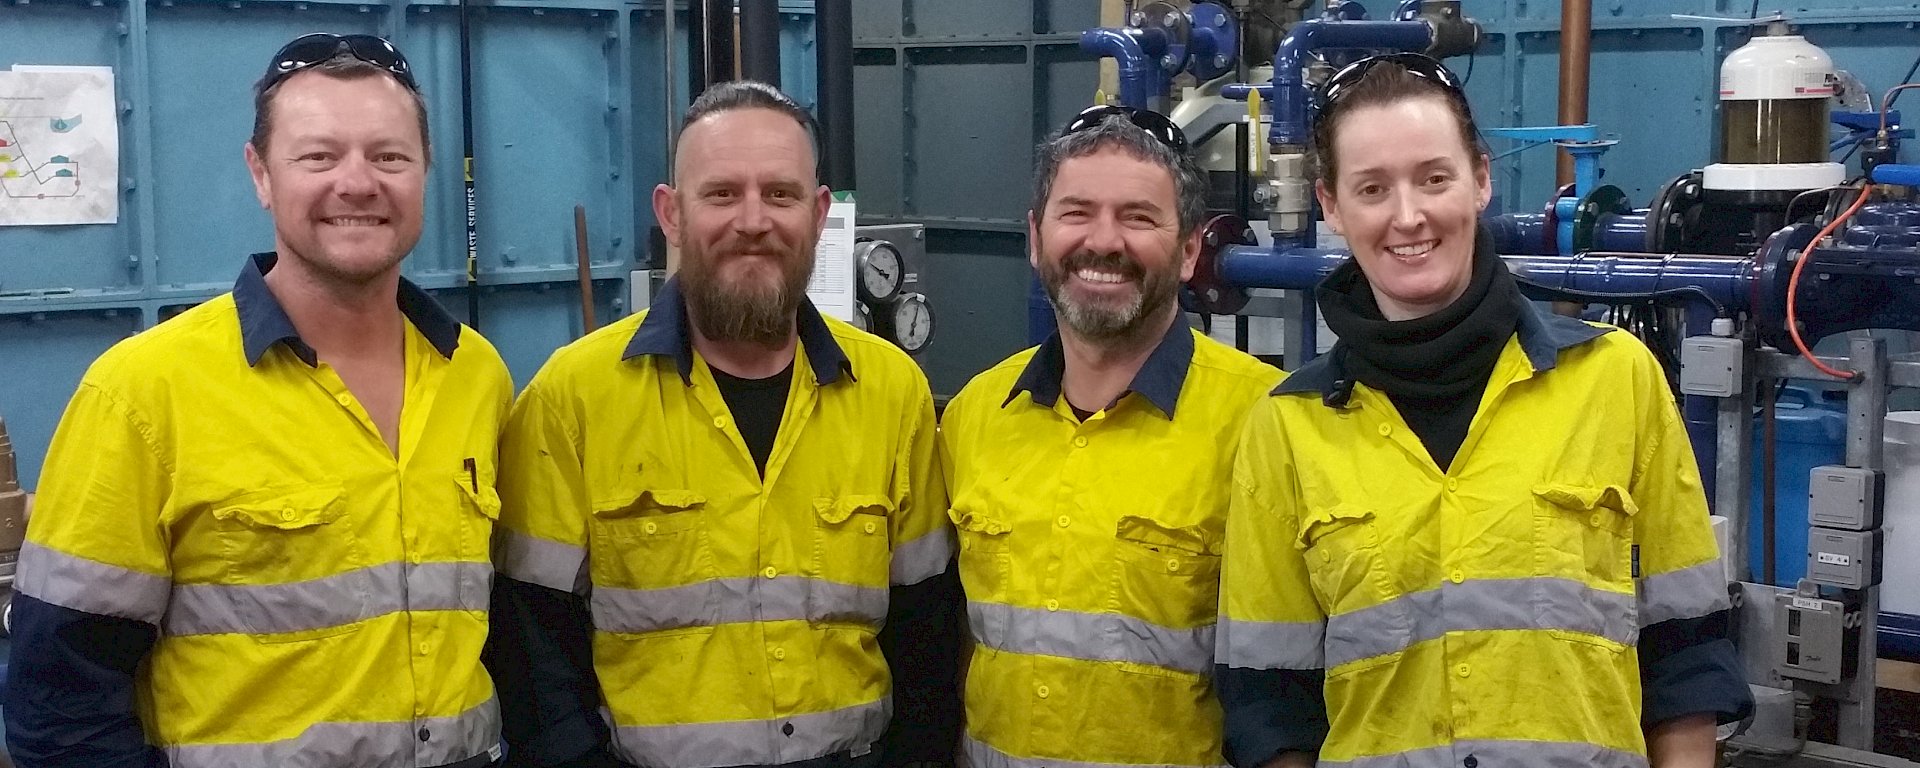 Four people in high visibility clothing in workshop, smiling at camera.